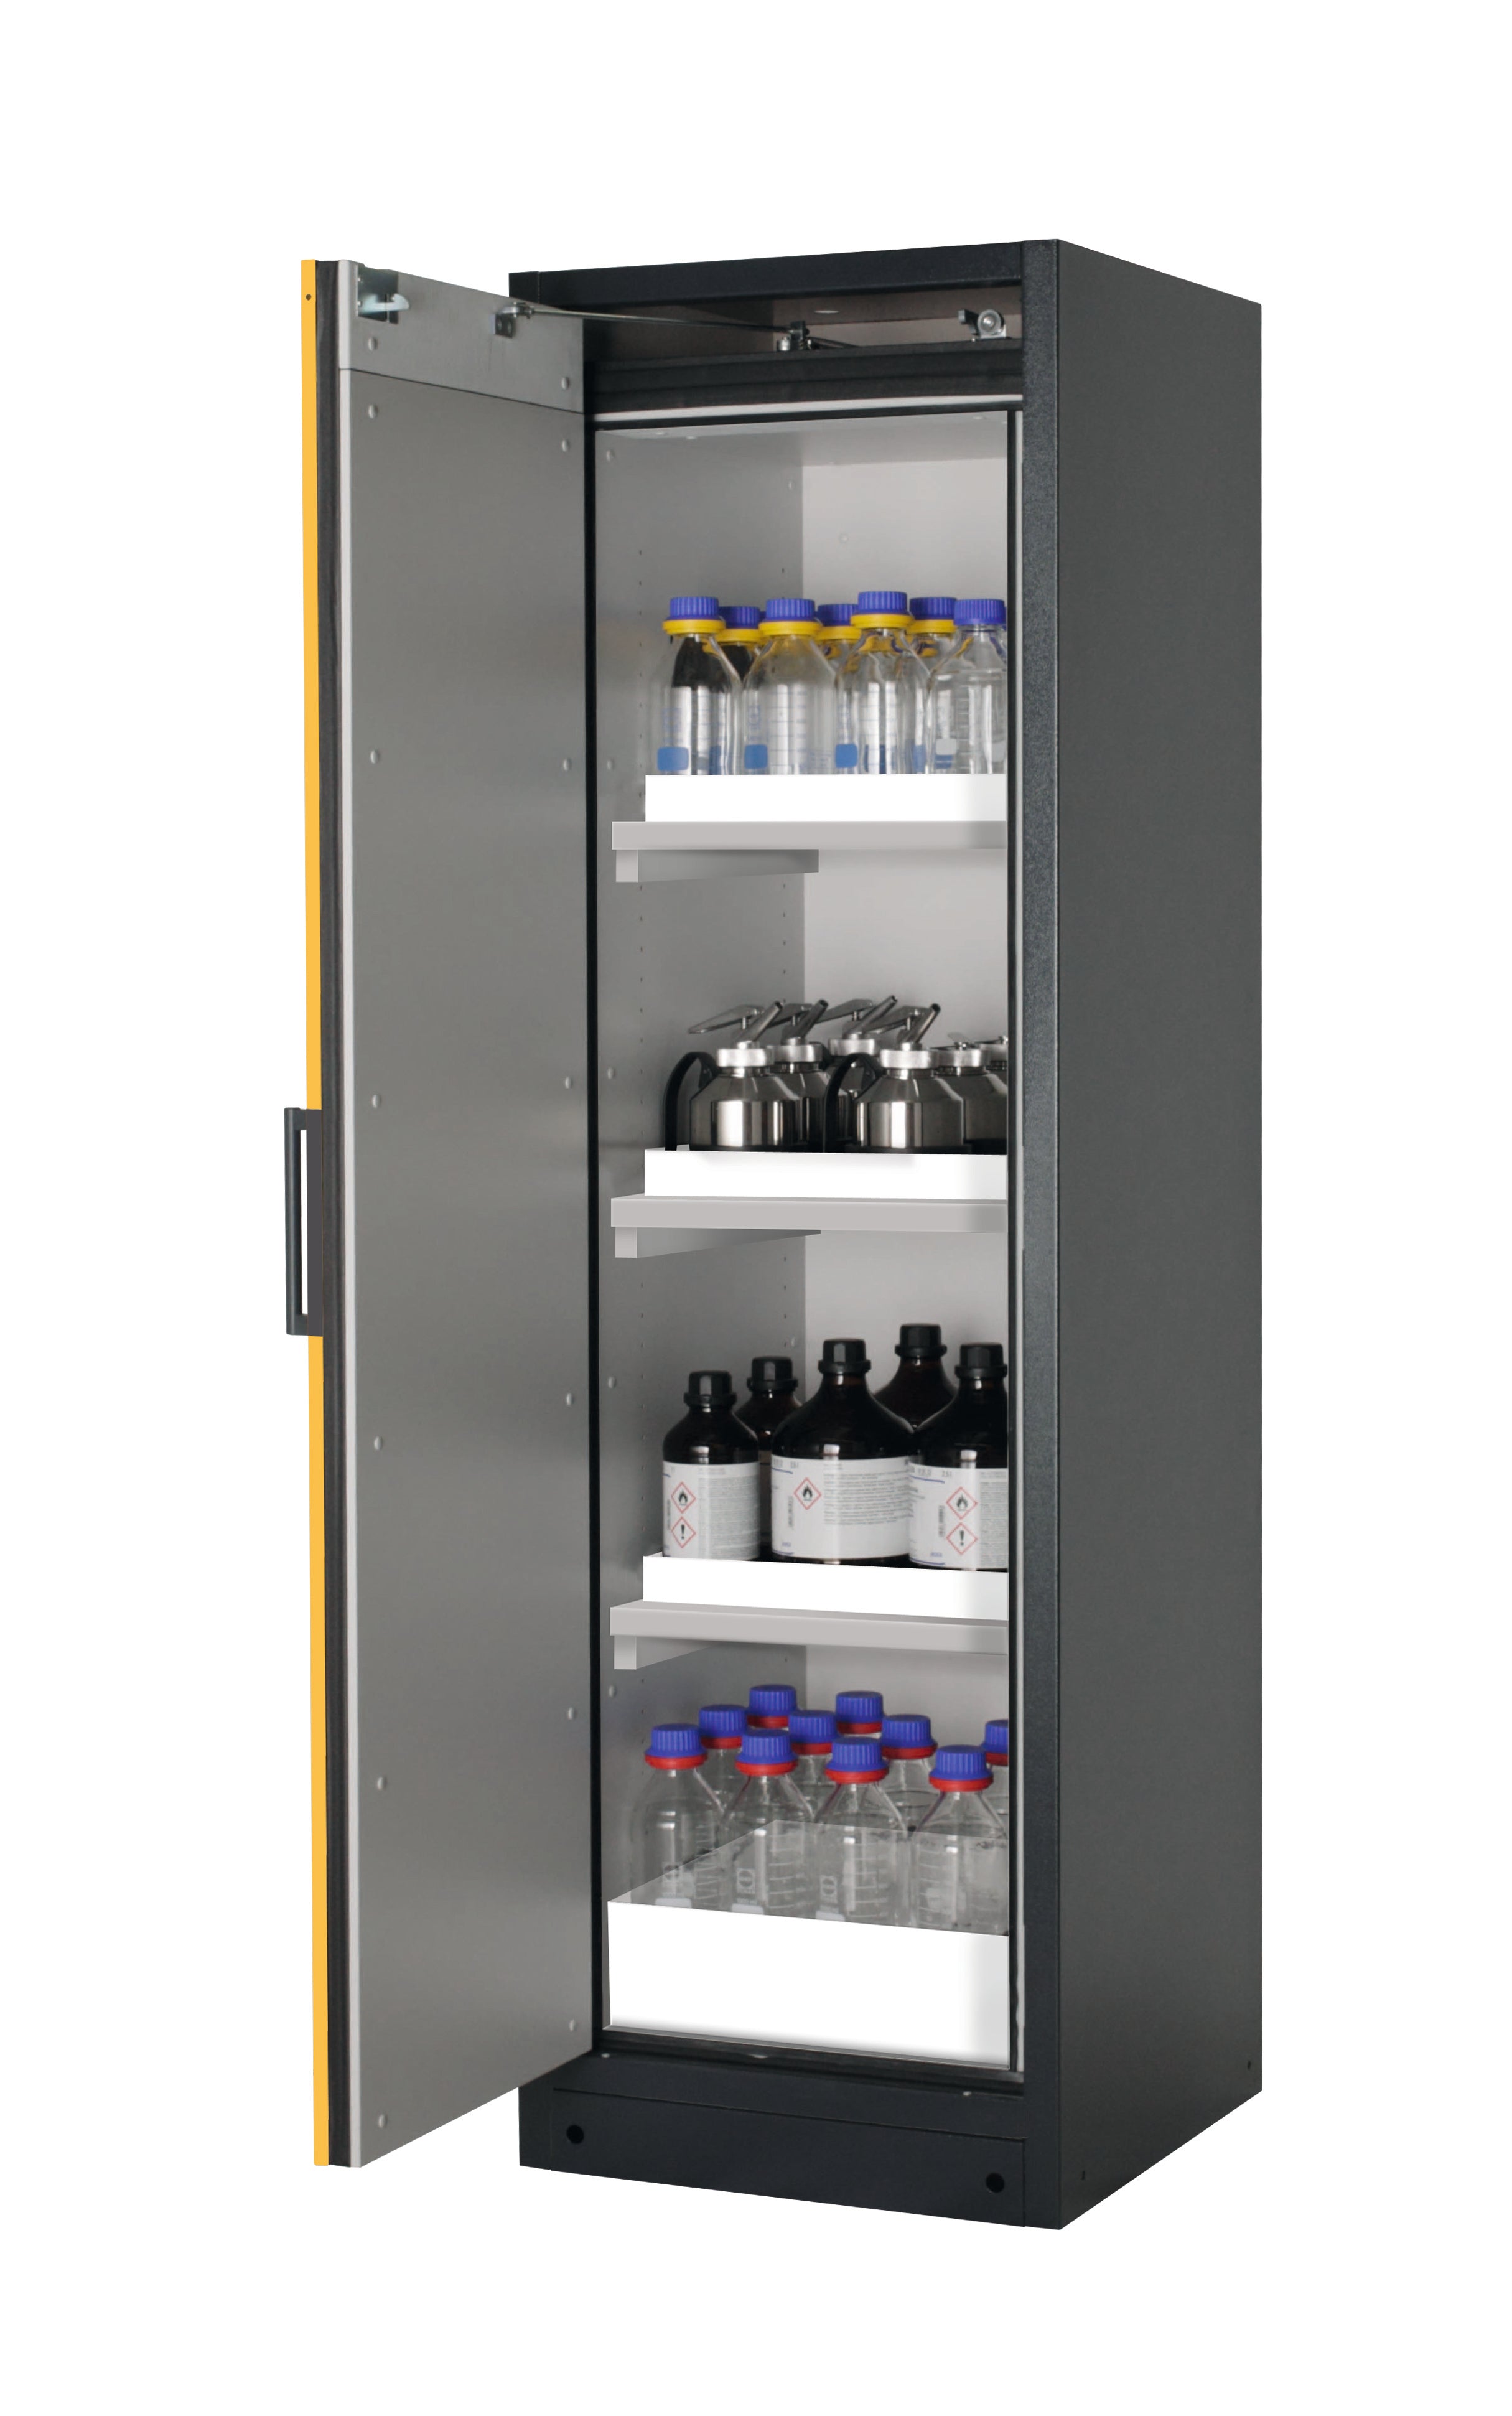 Type 90 safety storage cabinet Q-CLASSIC-90 model Q90.195.060 in warning yellow RAL 1004 with 3x tray shelf (standard) (polypropylene),